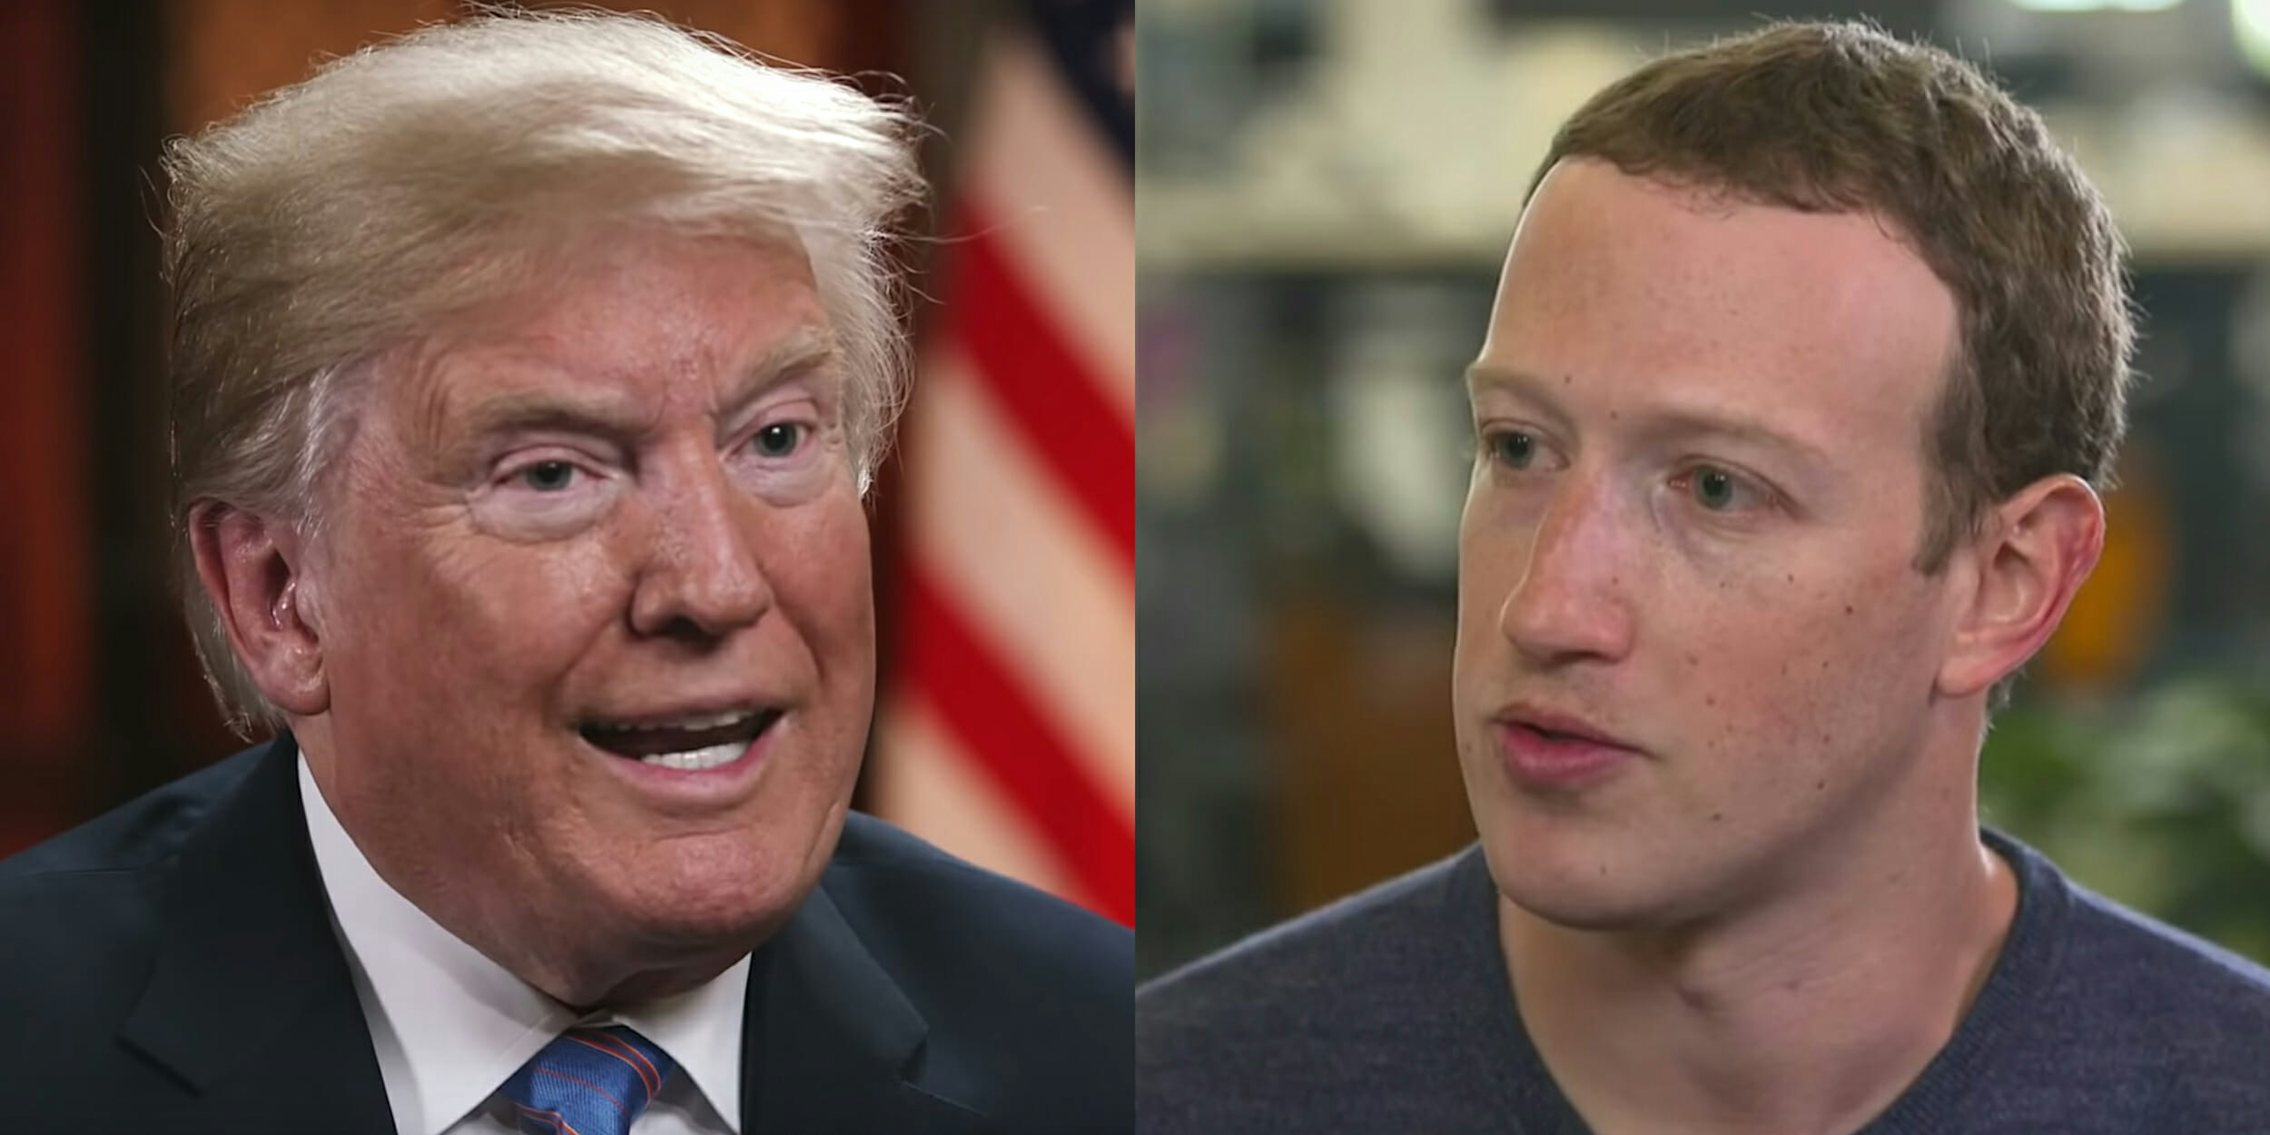 Mark Zuckerberg reportedly called President Donald Trump to congratulate him on winning the 2016 election.